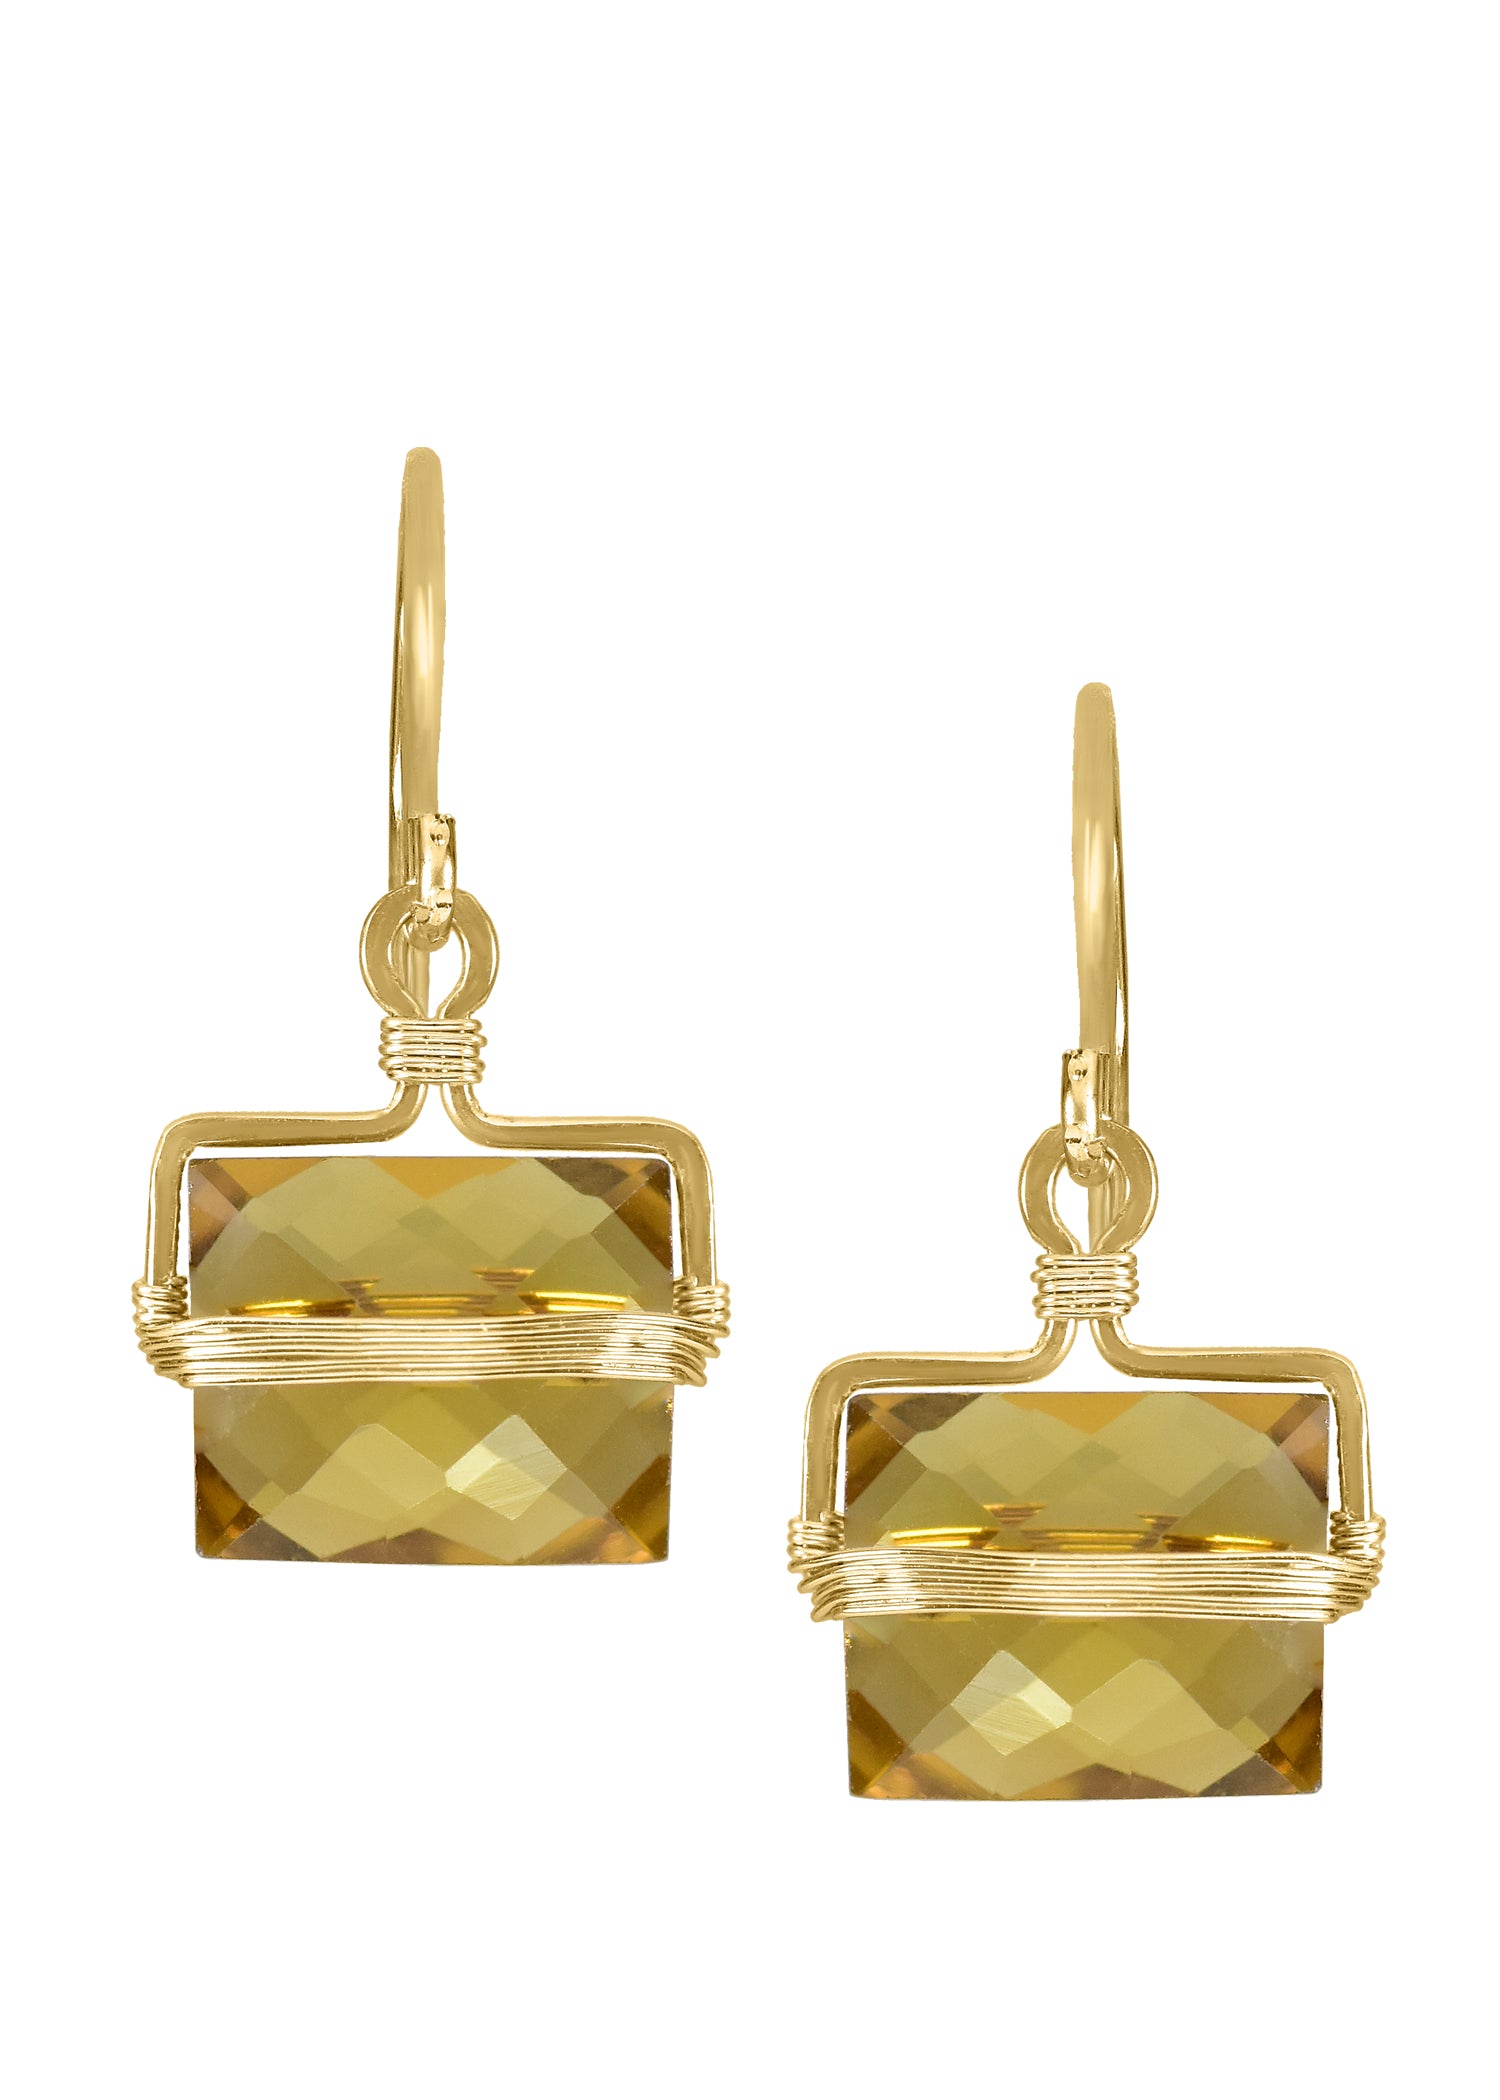 Whiskey quartz 14k gold fill Earrings measure 7/8" in length (including the ear wires) and 1/2" in width at the widest point Handmade in our Los Angeles studio